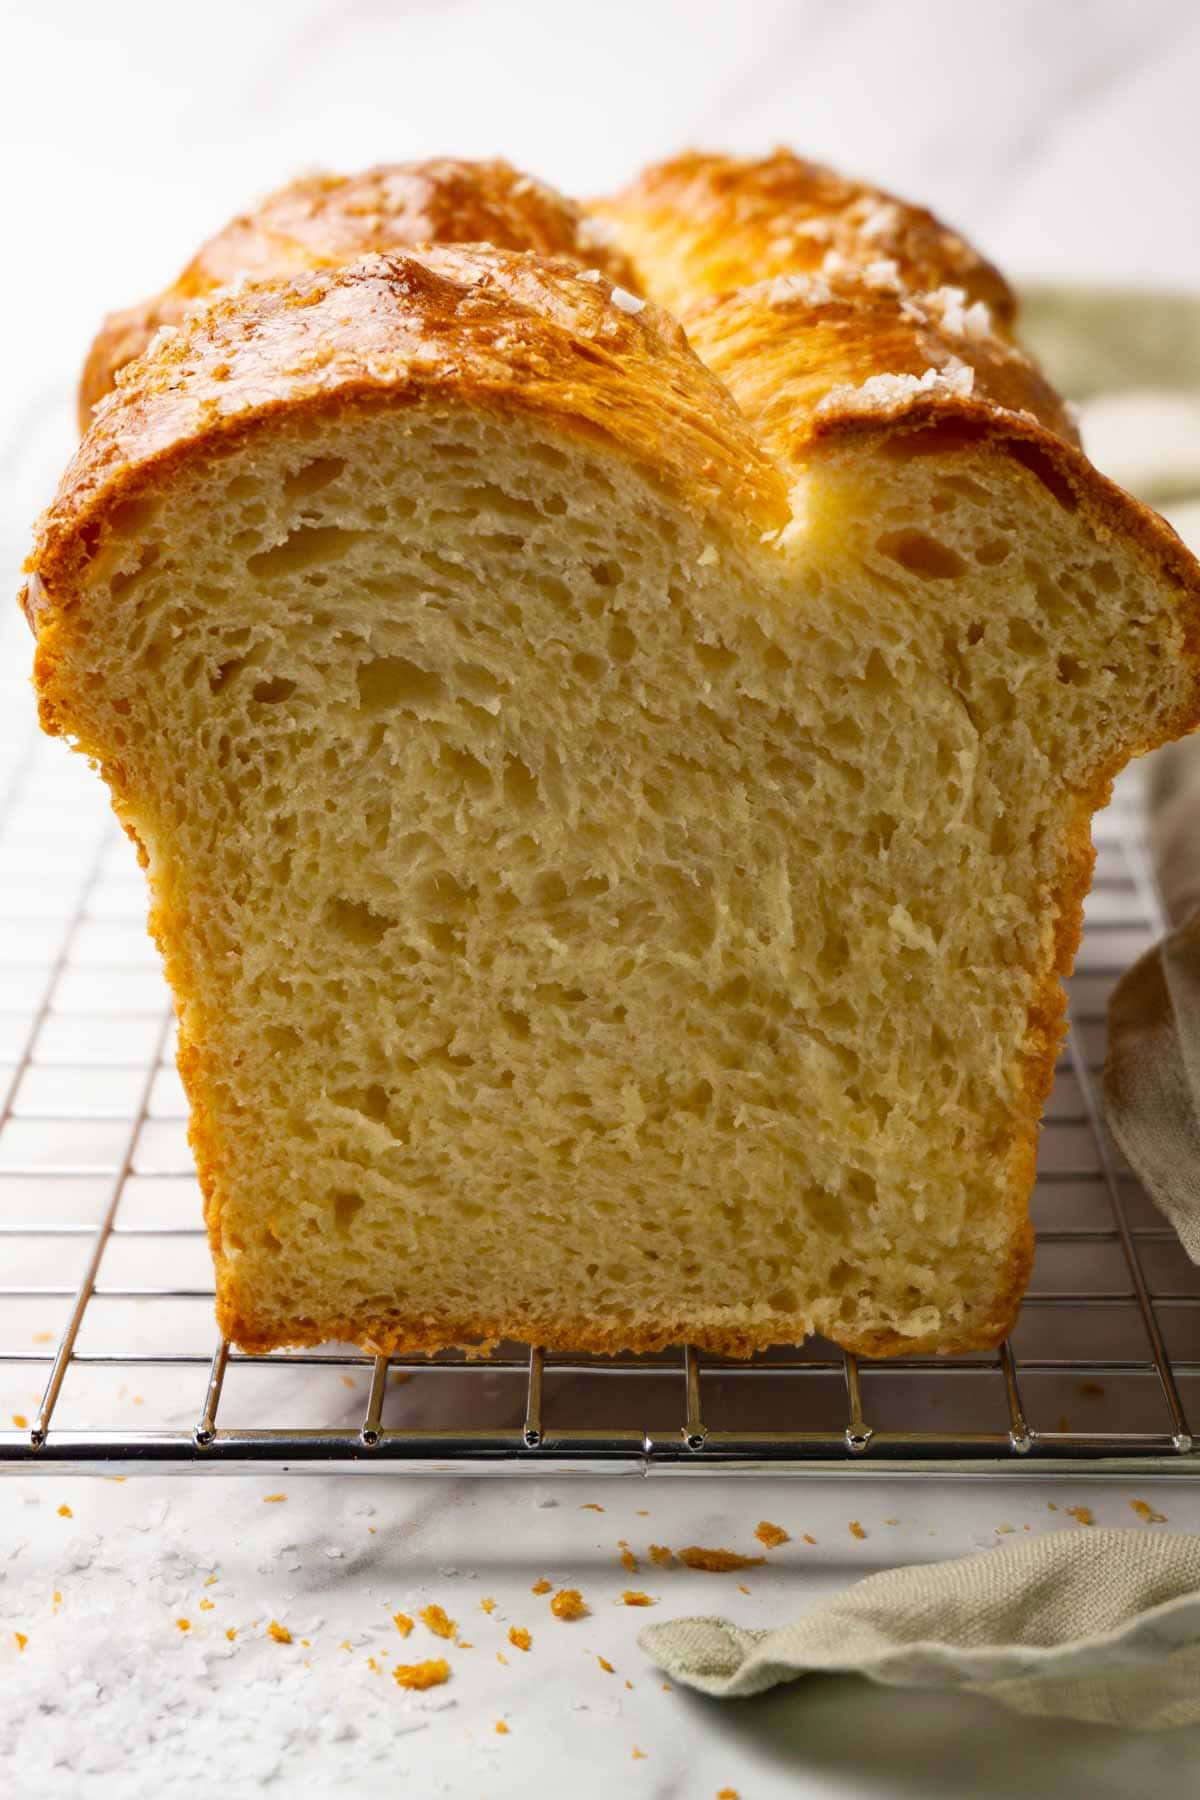 A loaf of brioche bread topped with flaky sea salt on a metal cooling rack, a slice was taken.